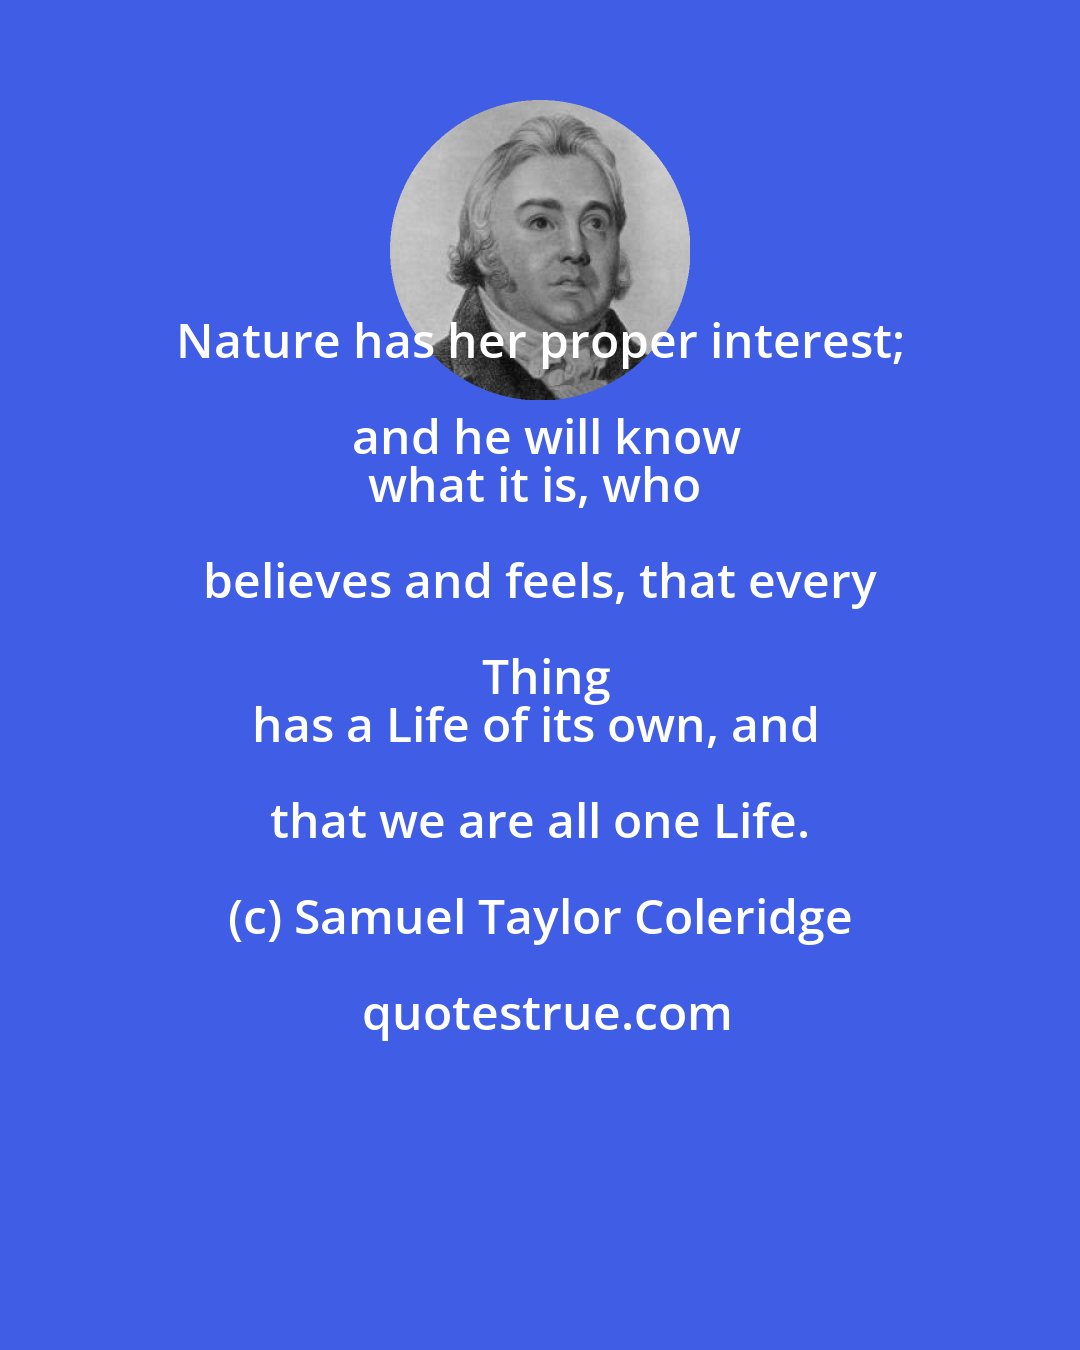 Samuel Taylor Coleridge: Nature has her proper interest; and he will know
what it is, who believes and feels, that every Thing
has a Life of its own, and that we are all one Life.